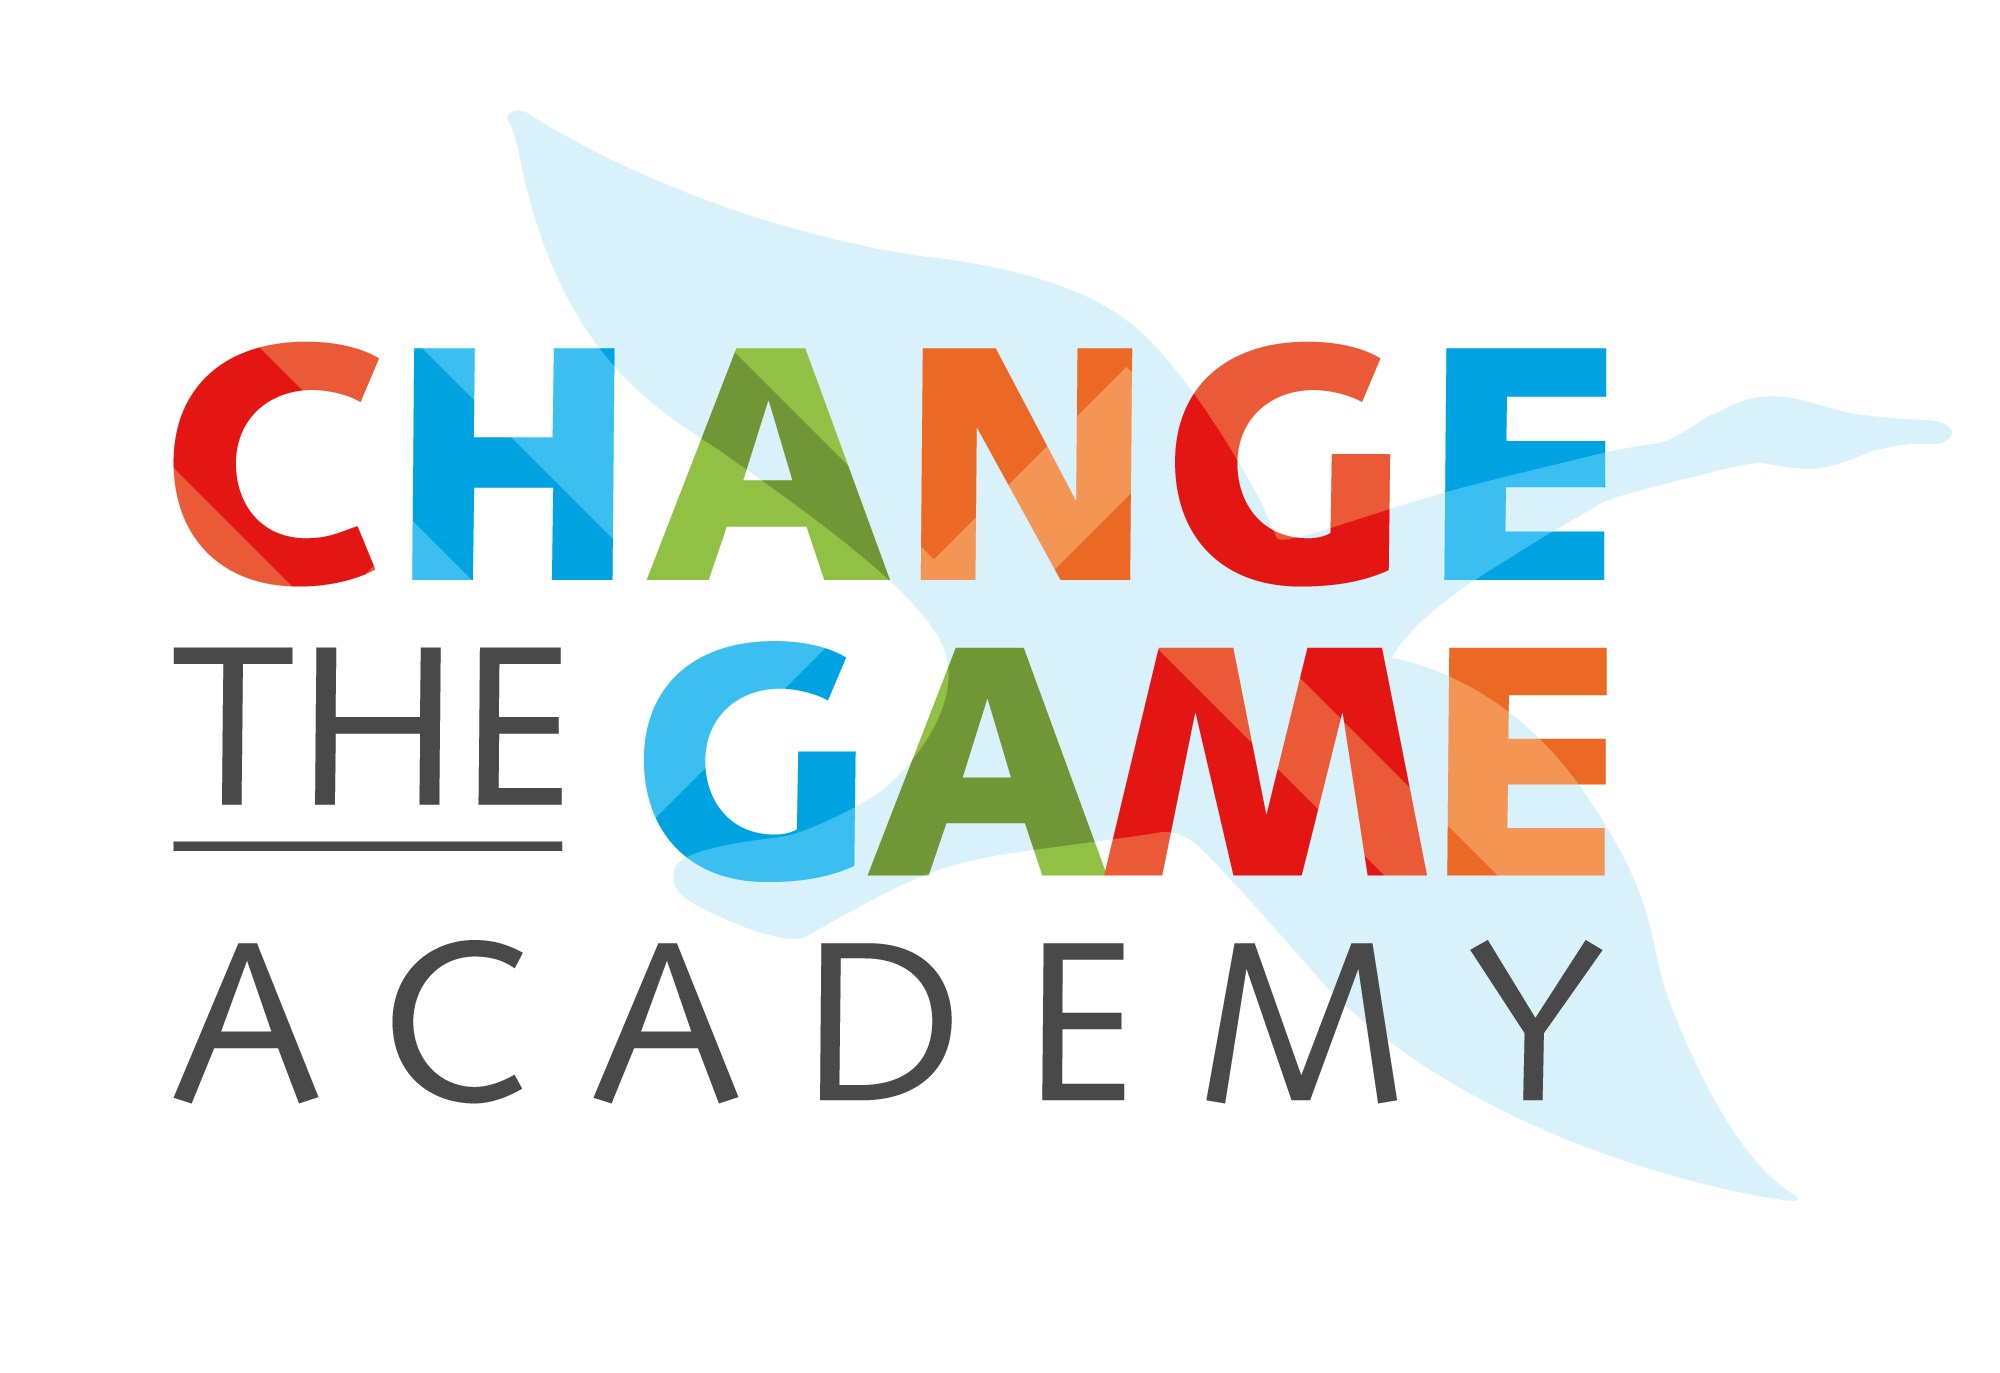 Change The Game Academy